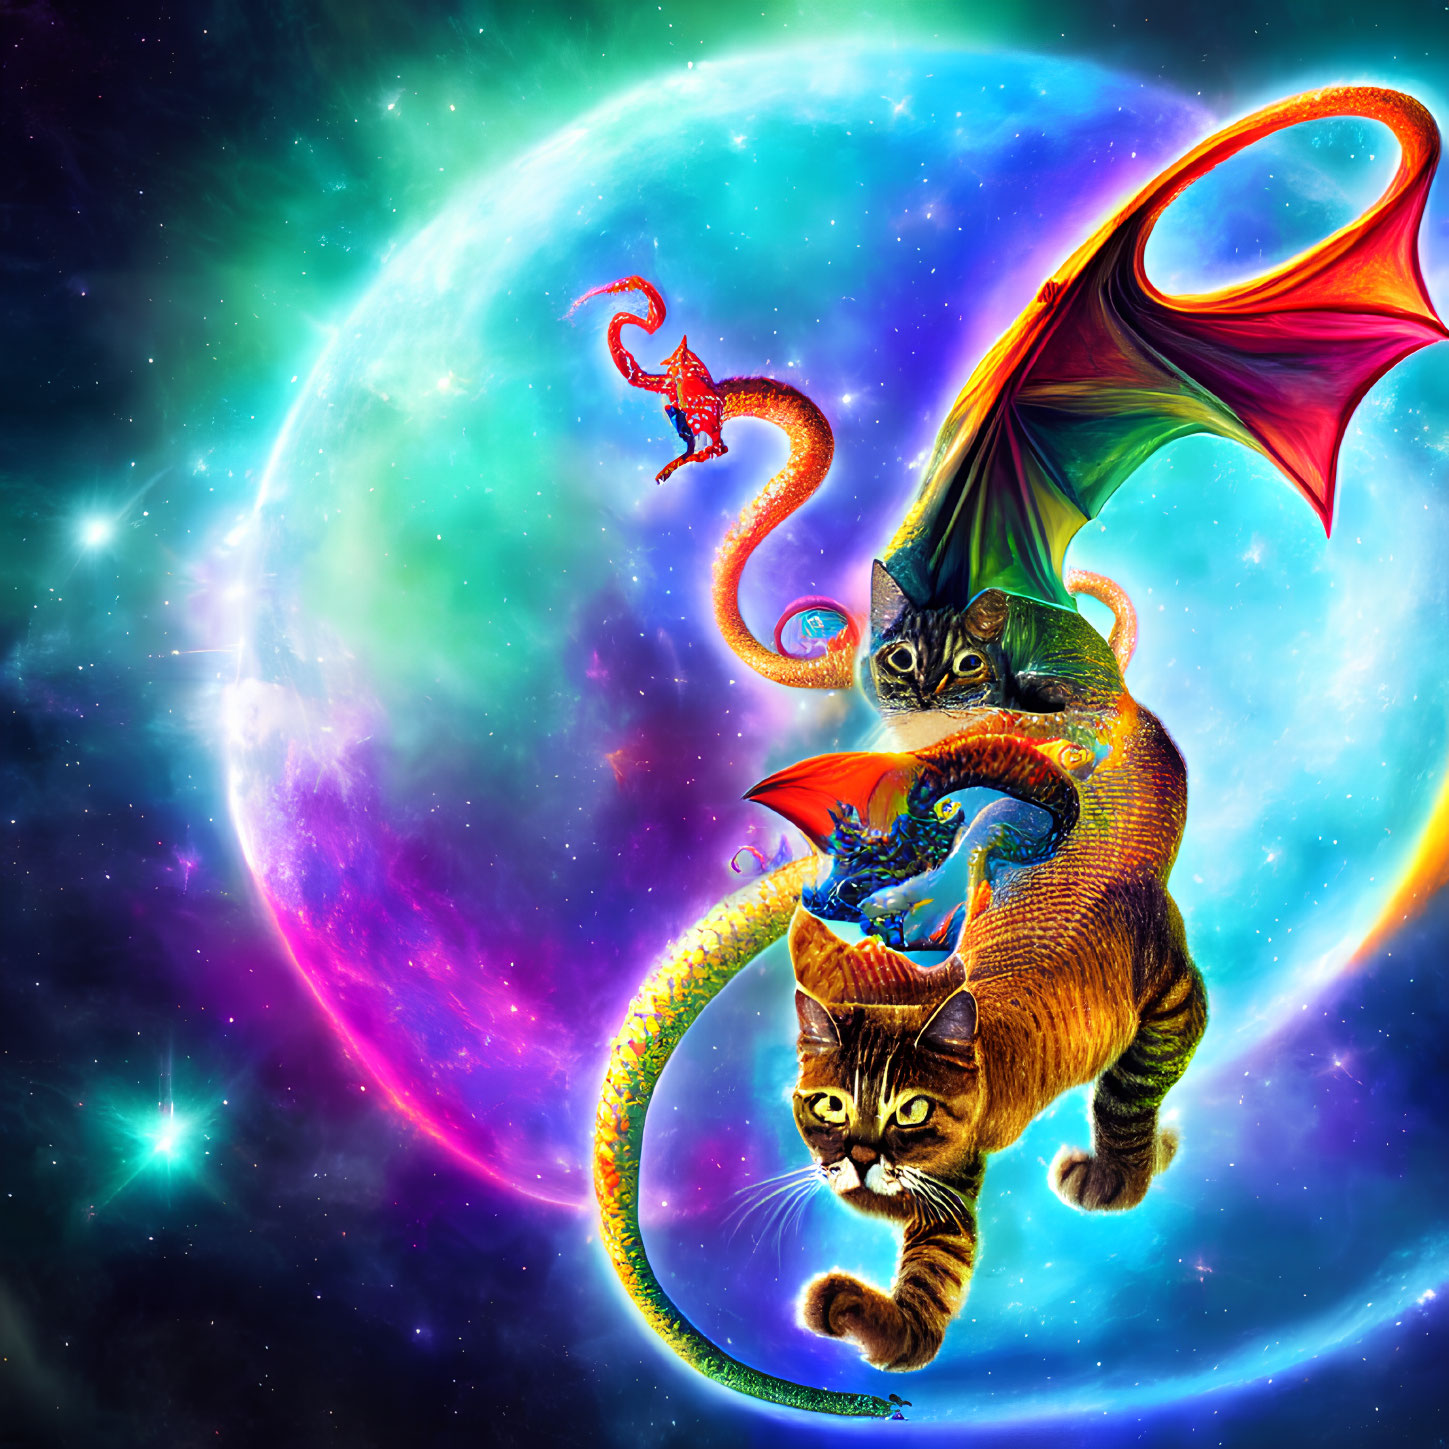 Whimsical flying cats with dragon wings in cosmic scene